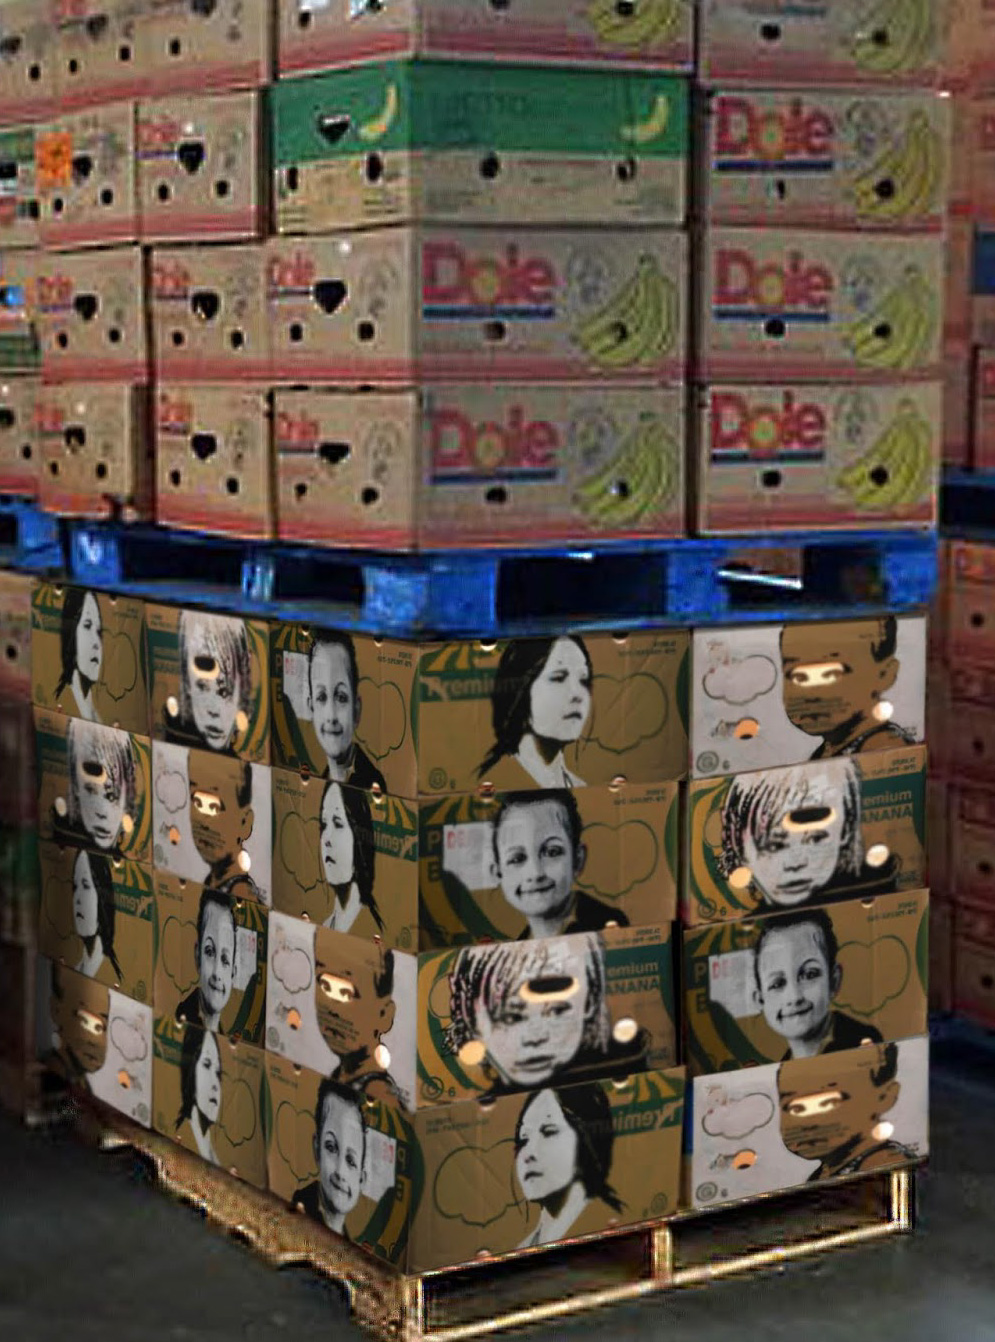 boxes stacked on a pallet - half of them have portraits of people painted on them and half are labeled with Dole Bananas logo.